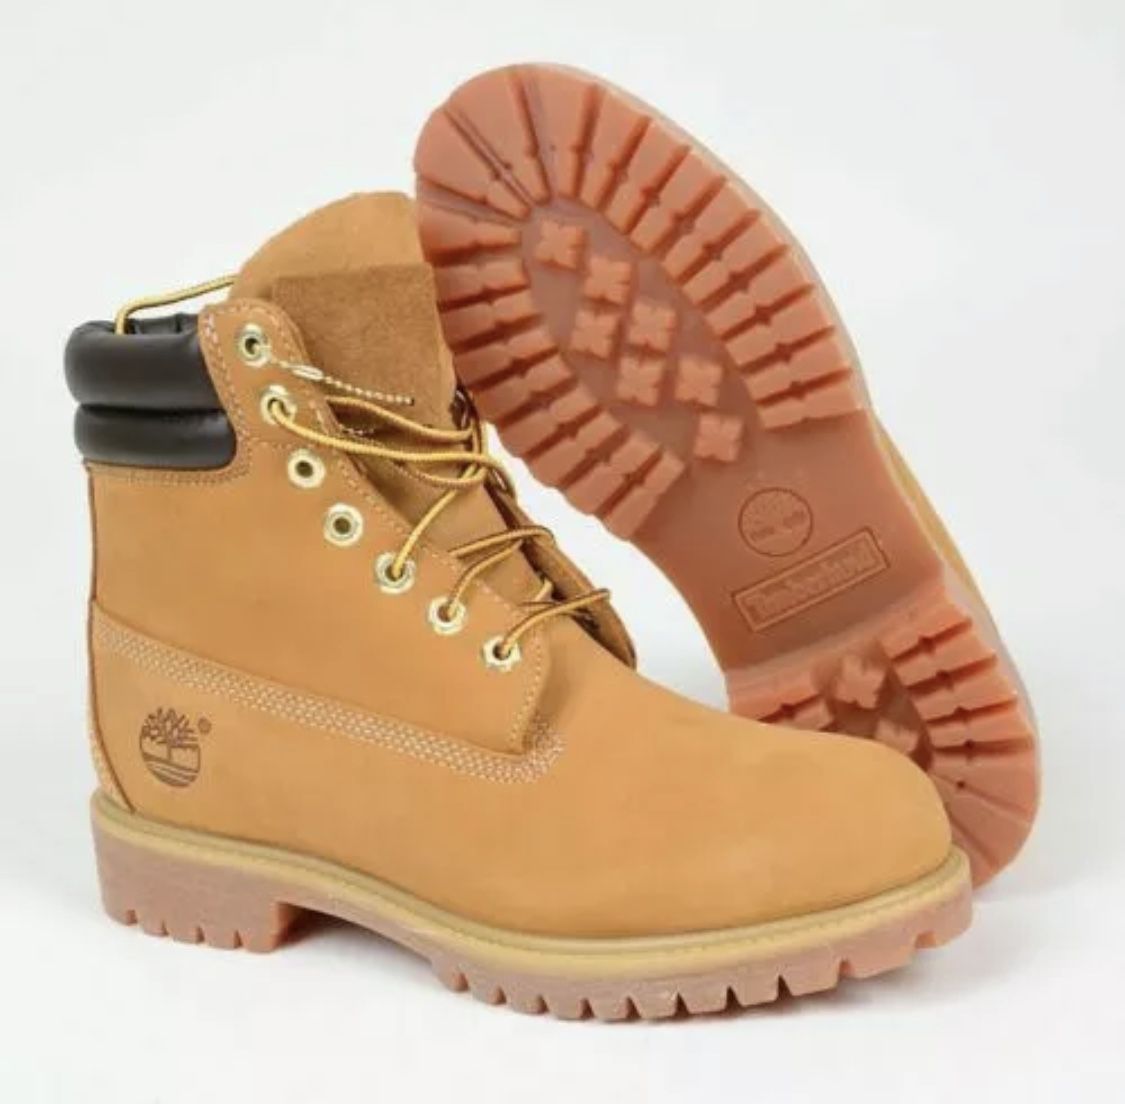 Timberland Mens 6" Inch PREMIUM Waterproof WORK BOOTS Double Sole 73540 Mens 8.5